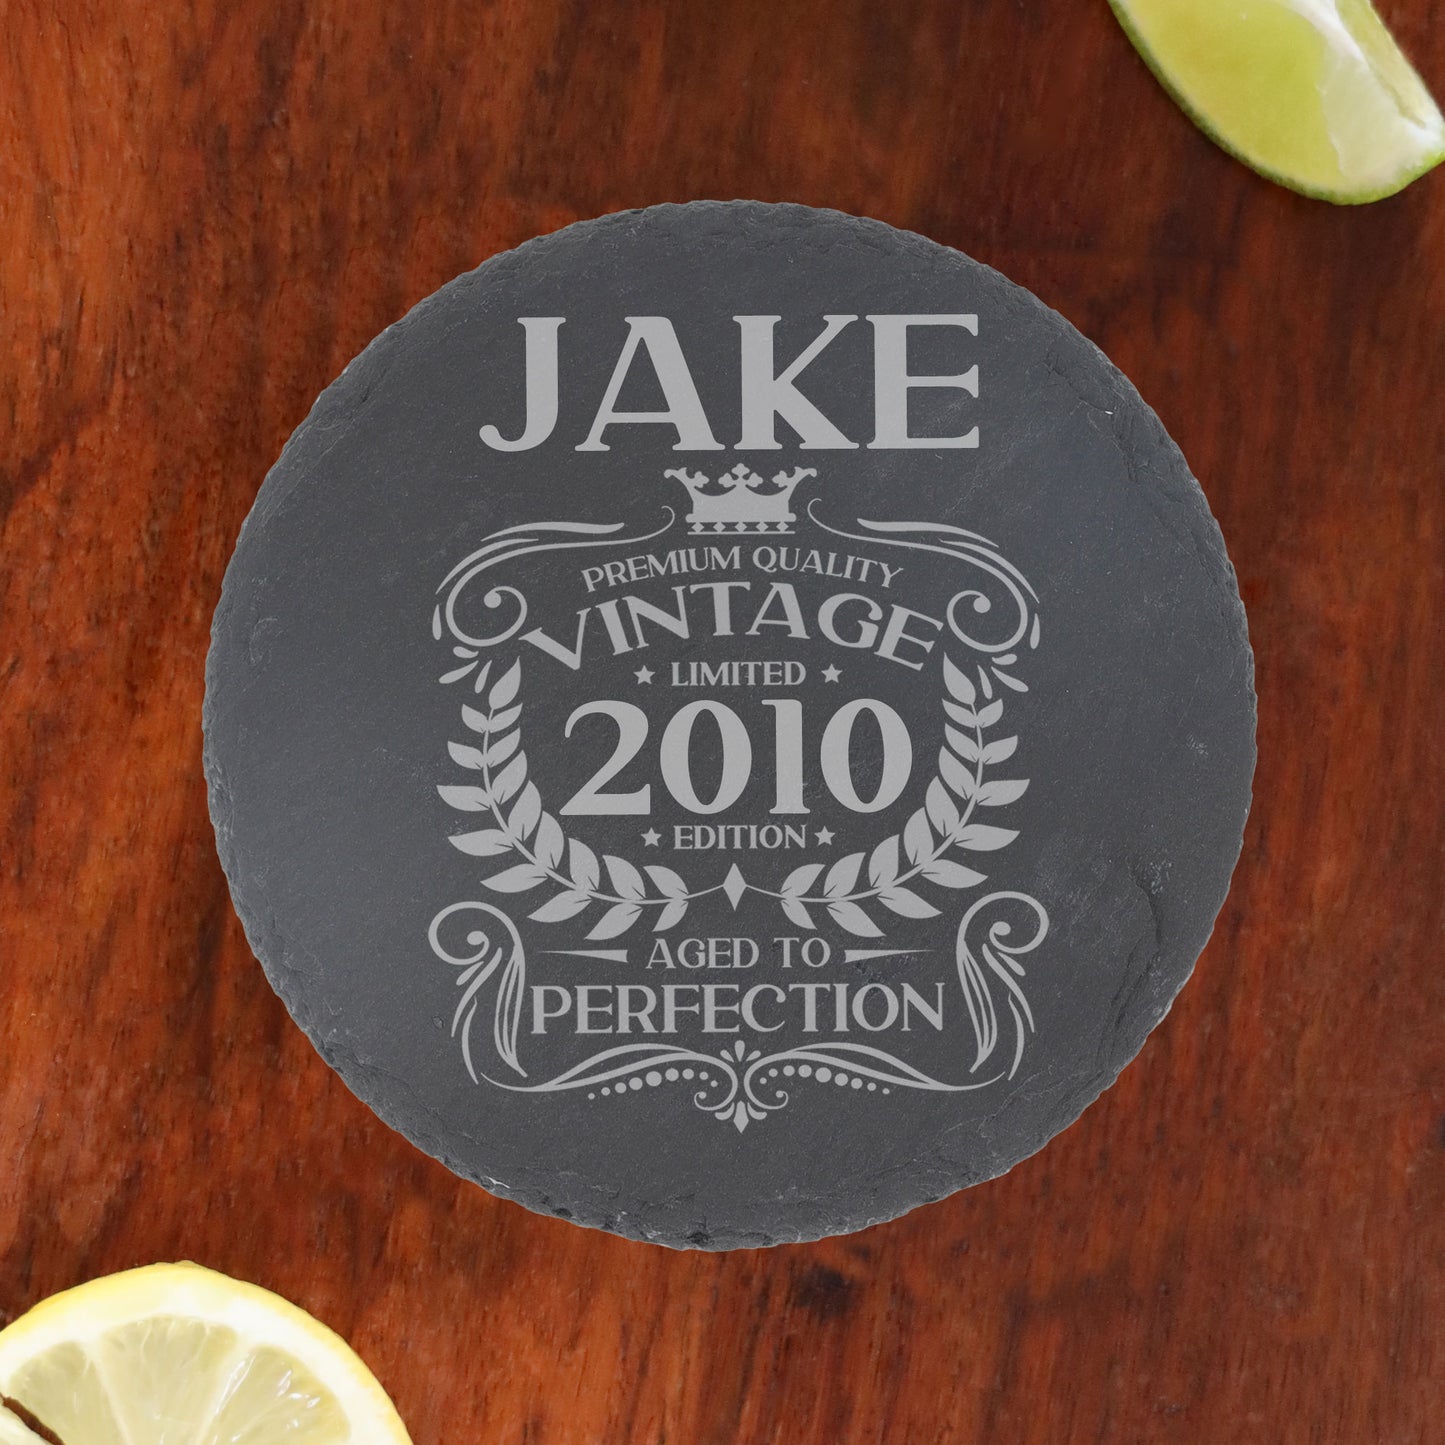 Personalised Vintage 2010 Mug and/or Coaster  - Always Looking Good - Round Coaster On Its Own  